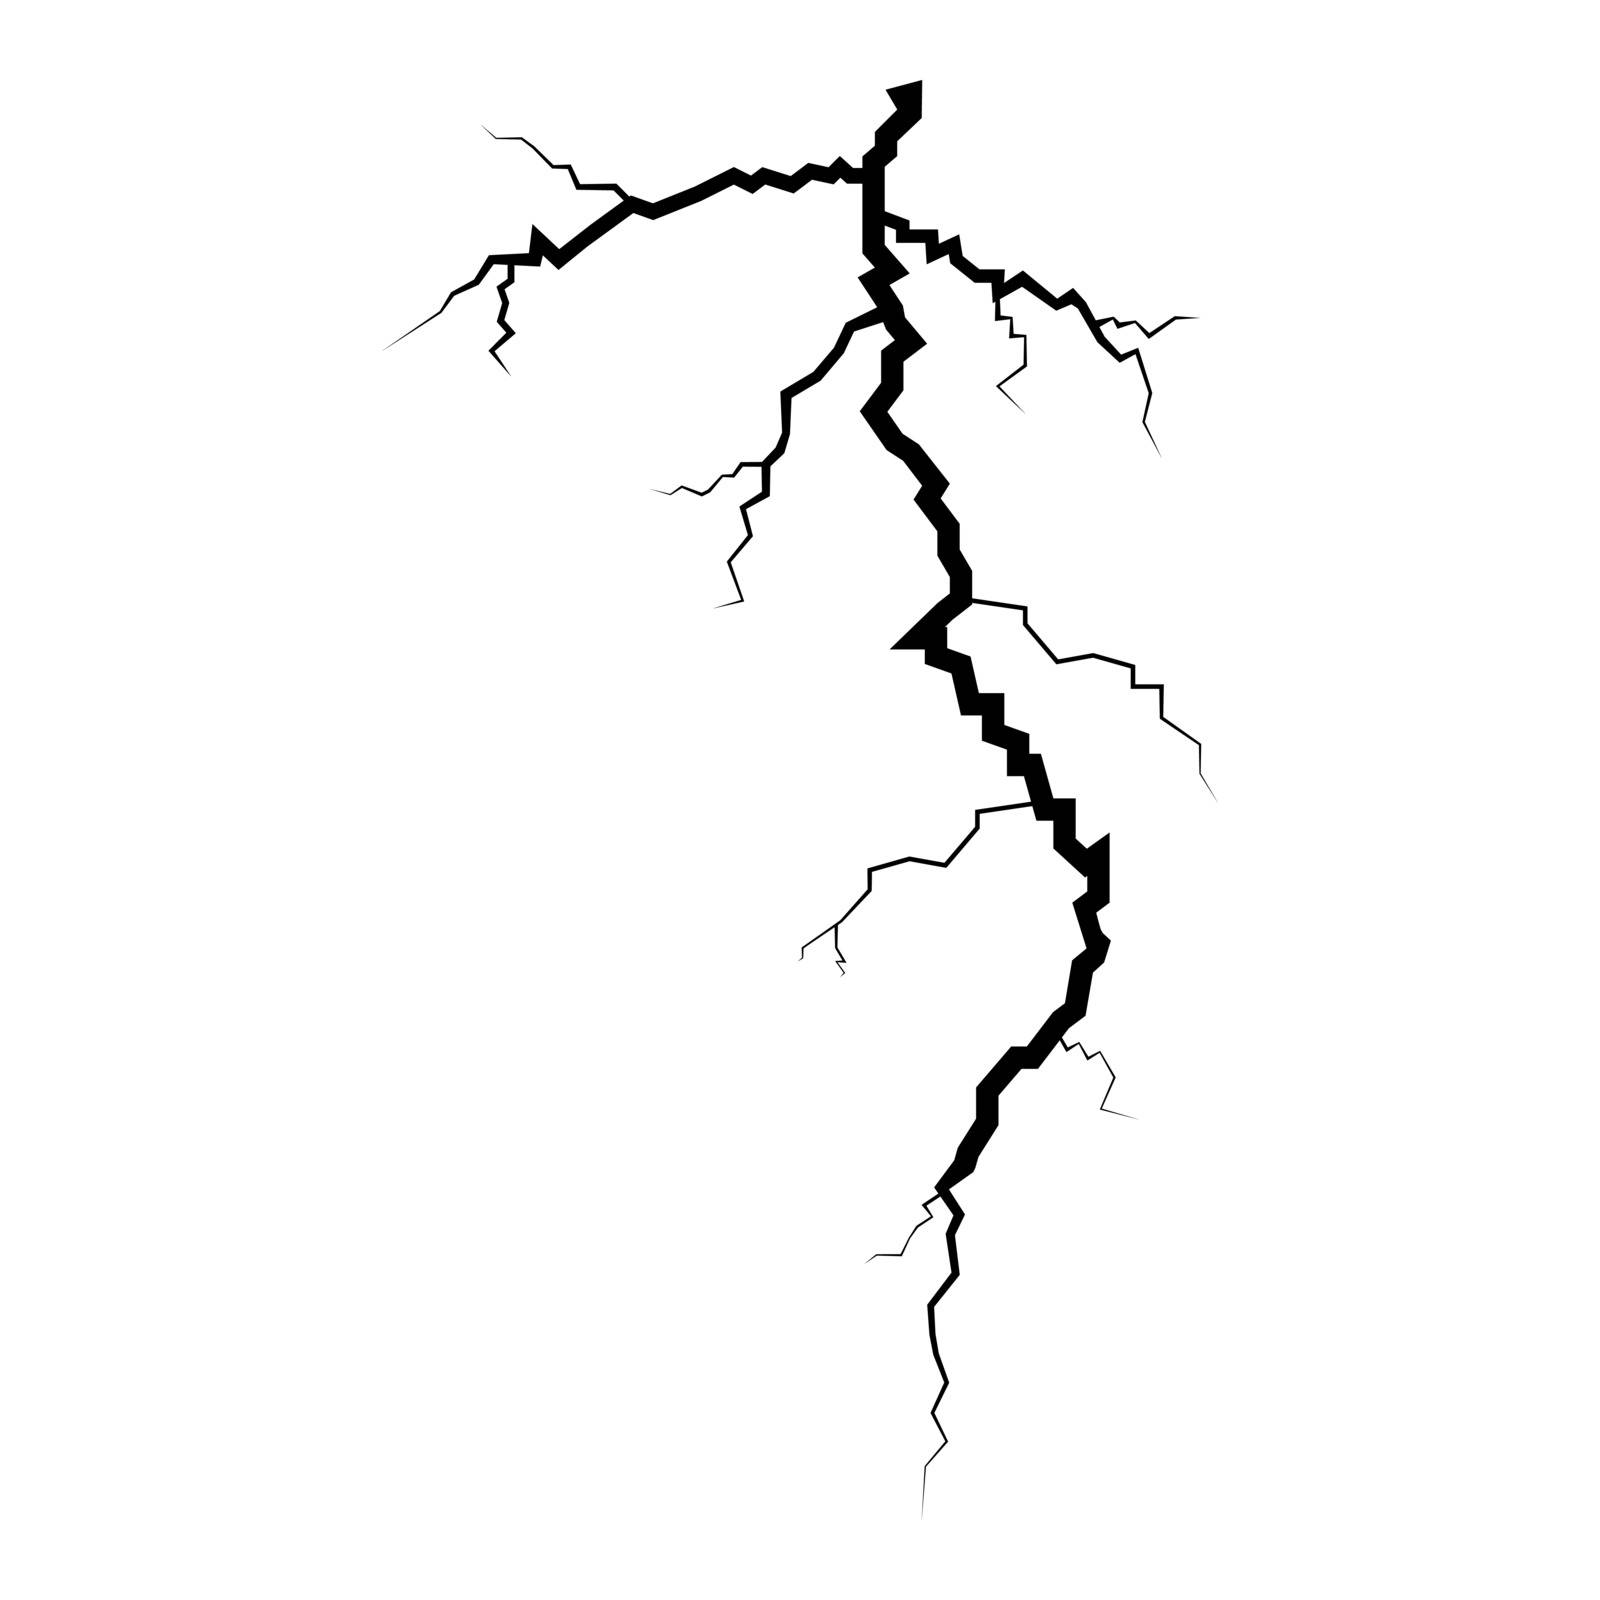 Thunderstorm crack icon black color by serhii435